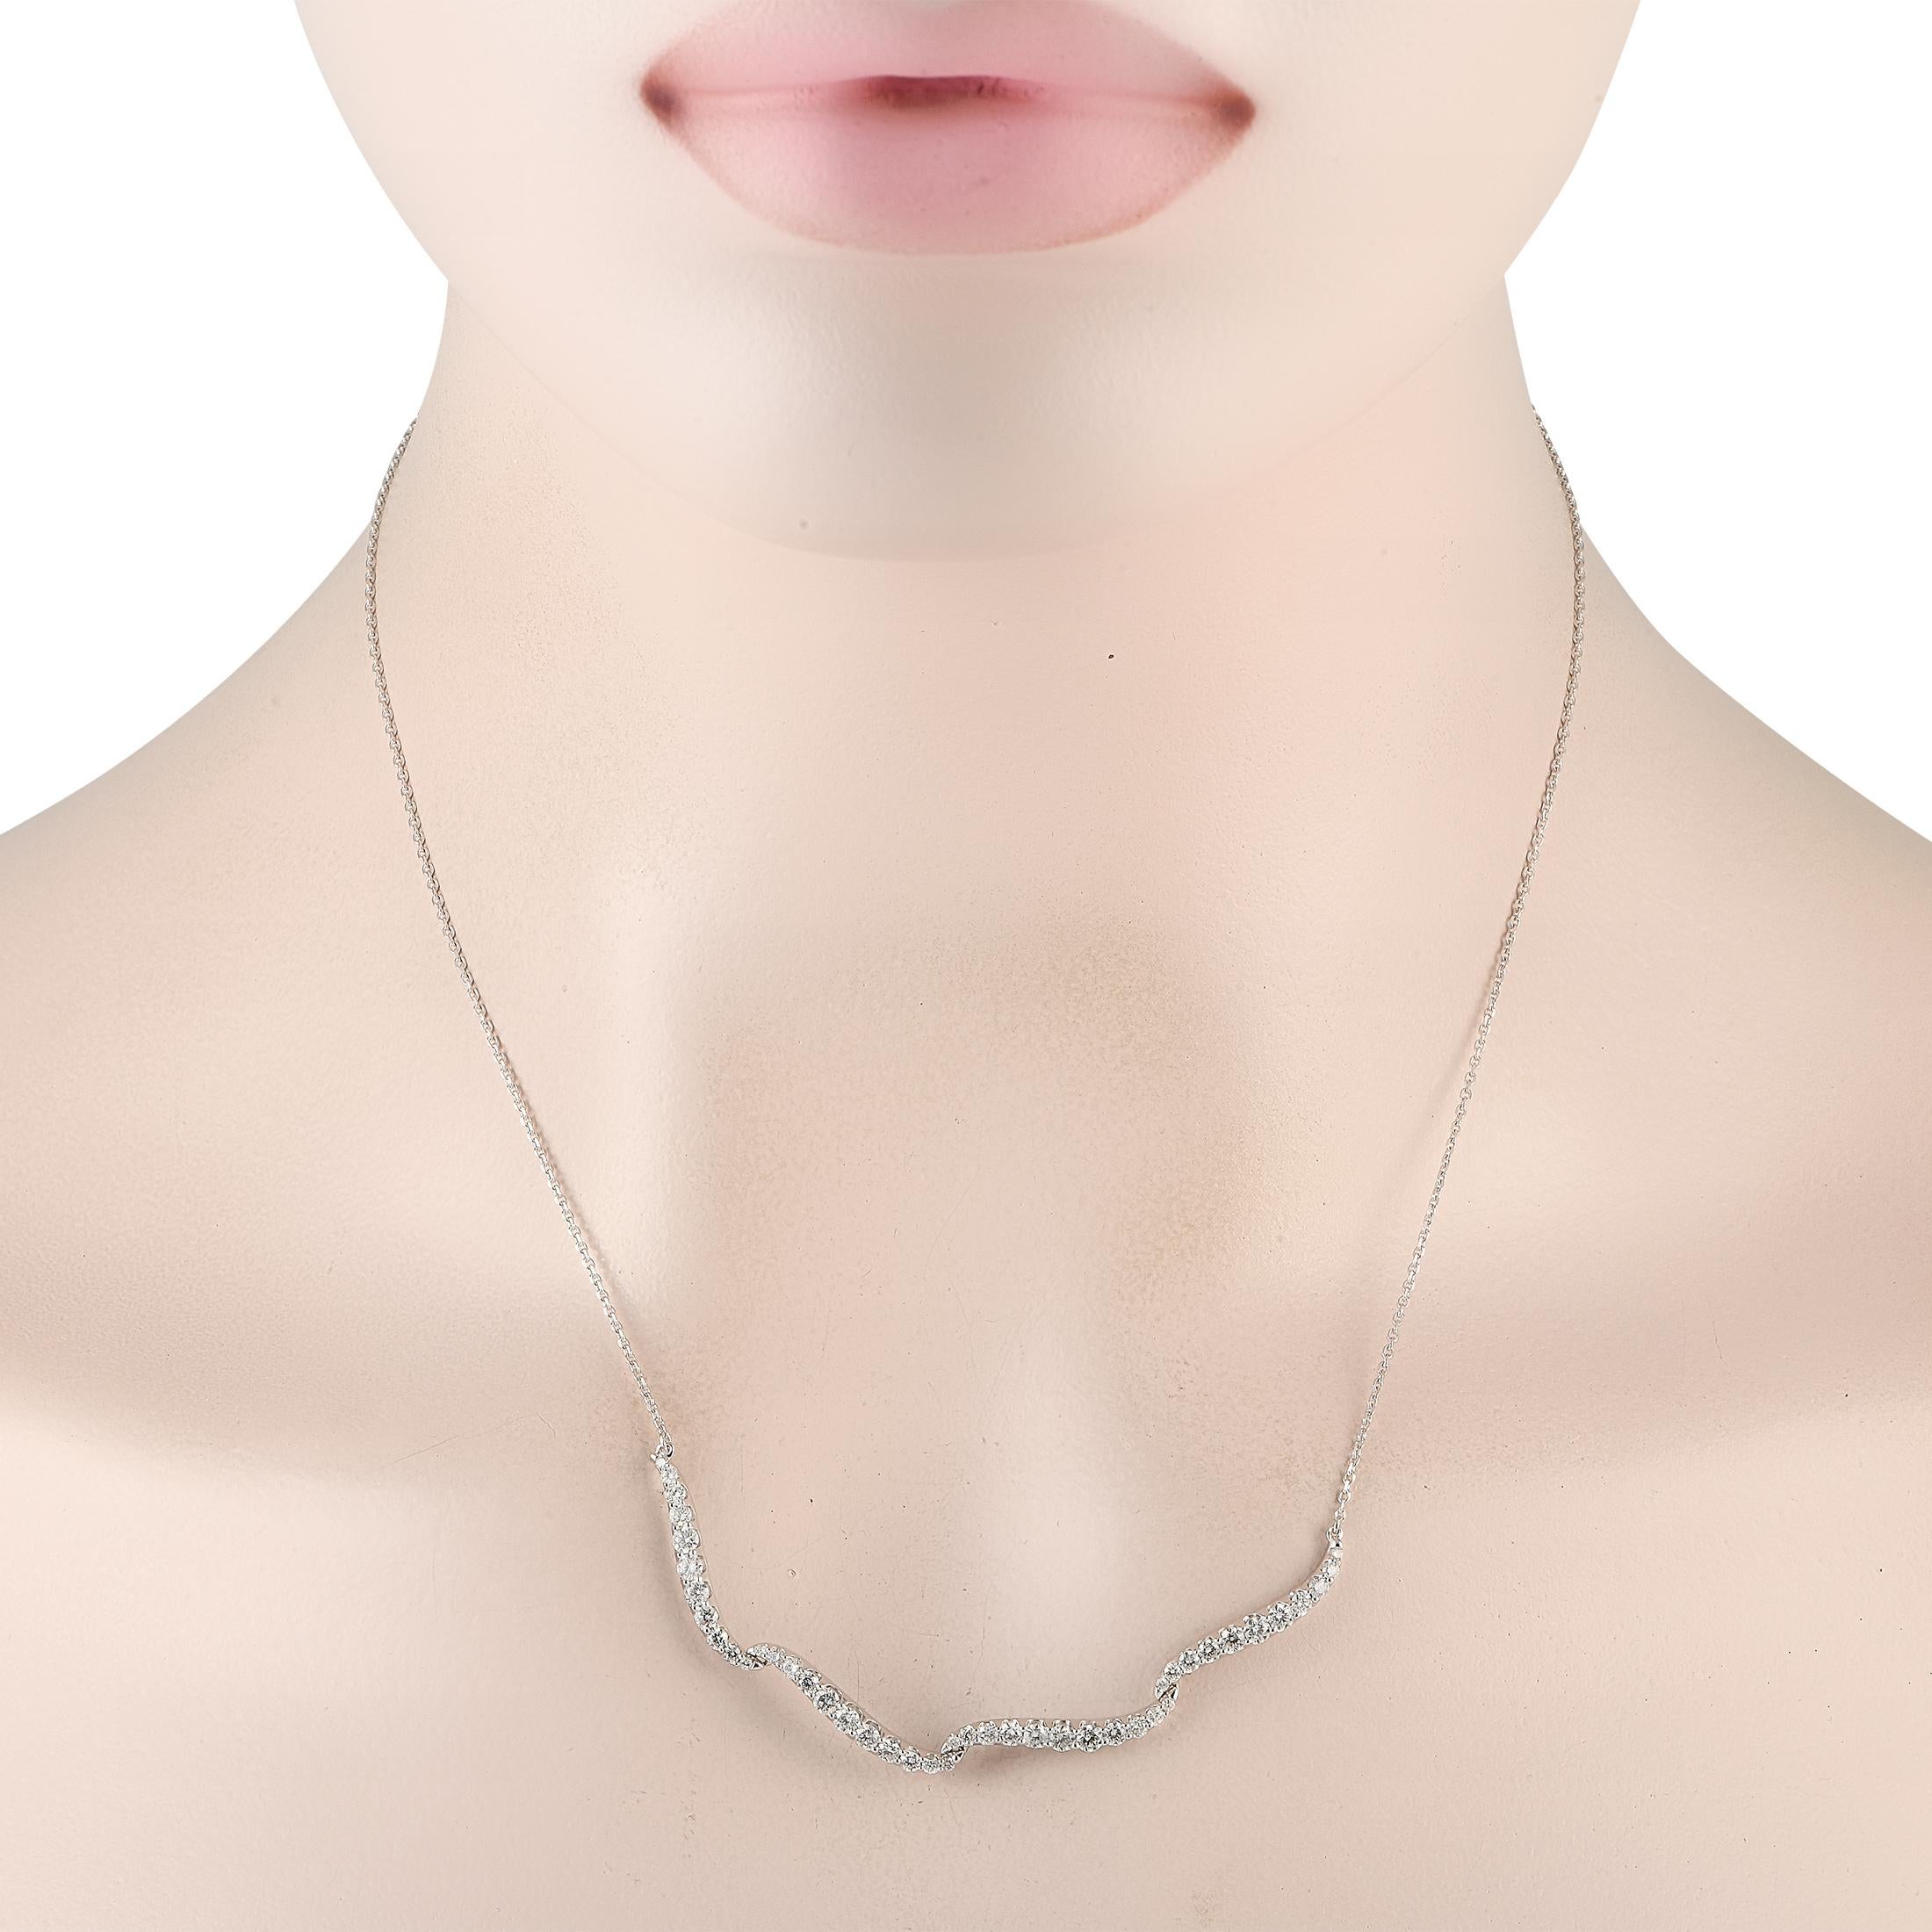 Curved lines add a graceful sense of movement to this exquisite luxury necklace. Crafted from 14K White Gold, this necklace features a 16 chain and comes to life thanks to inset Diamond accents totaling 1.25 carats.This jewelry piece is offered in